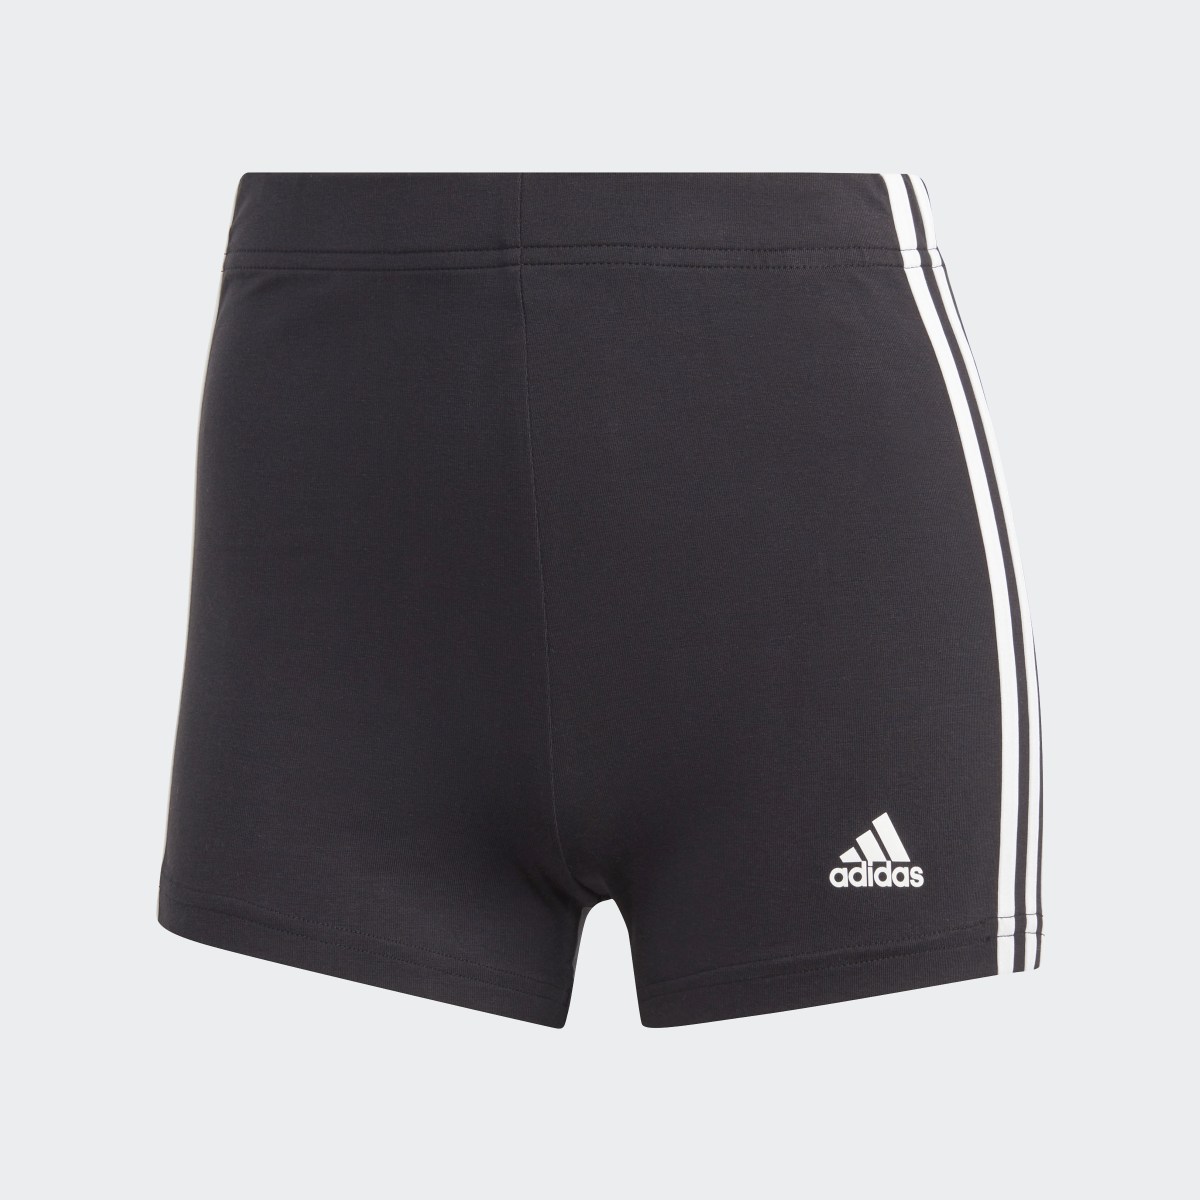 Adidas Essentials 3-Stripes Single Jersey Booty Shorts. 4